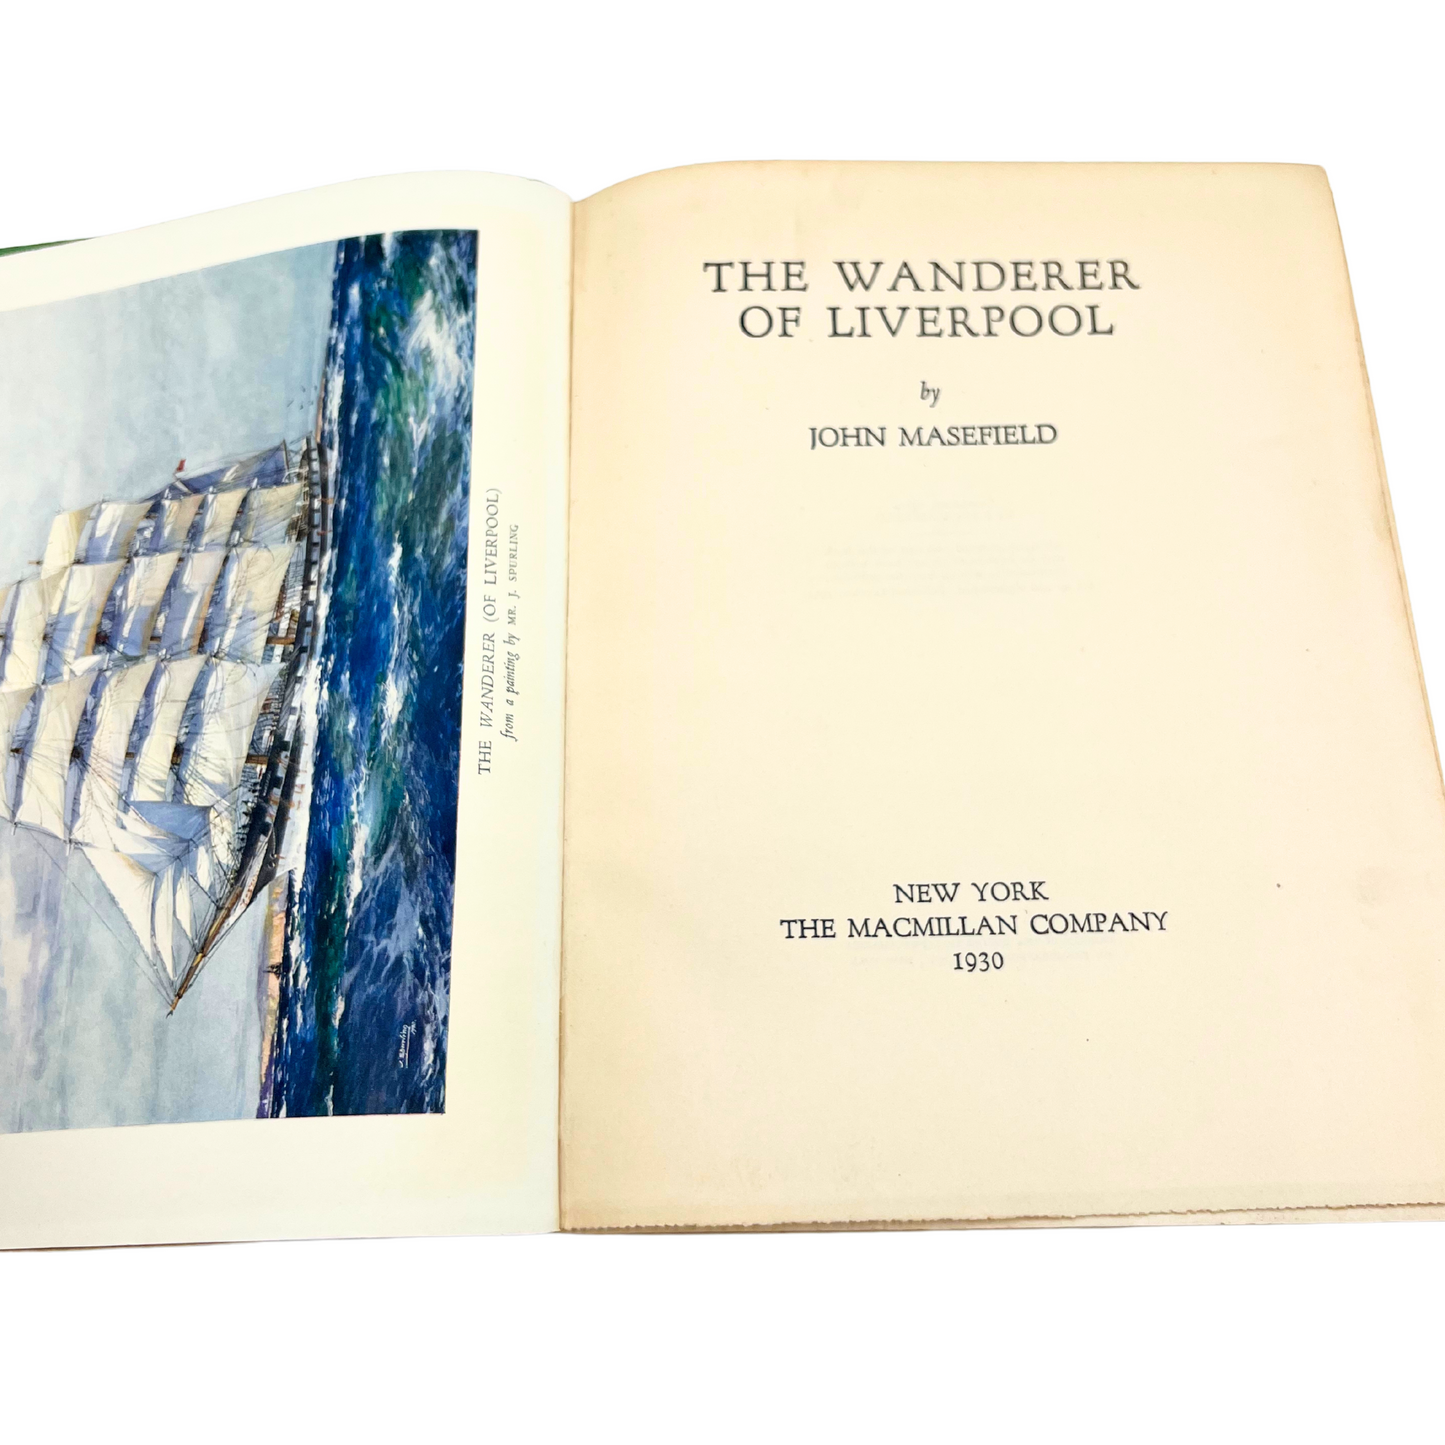 1930 book: The Wanderer of Liverpool